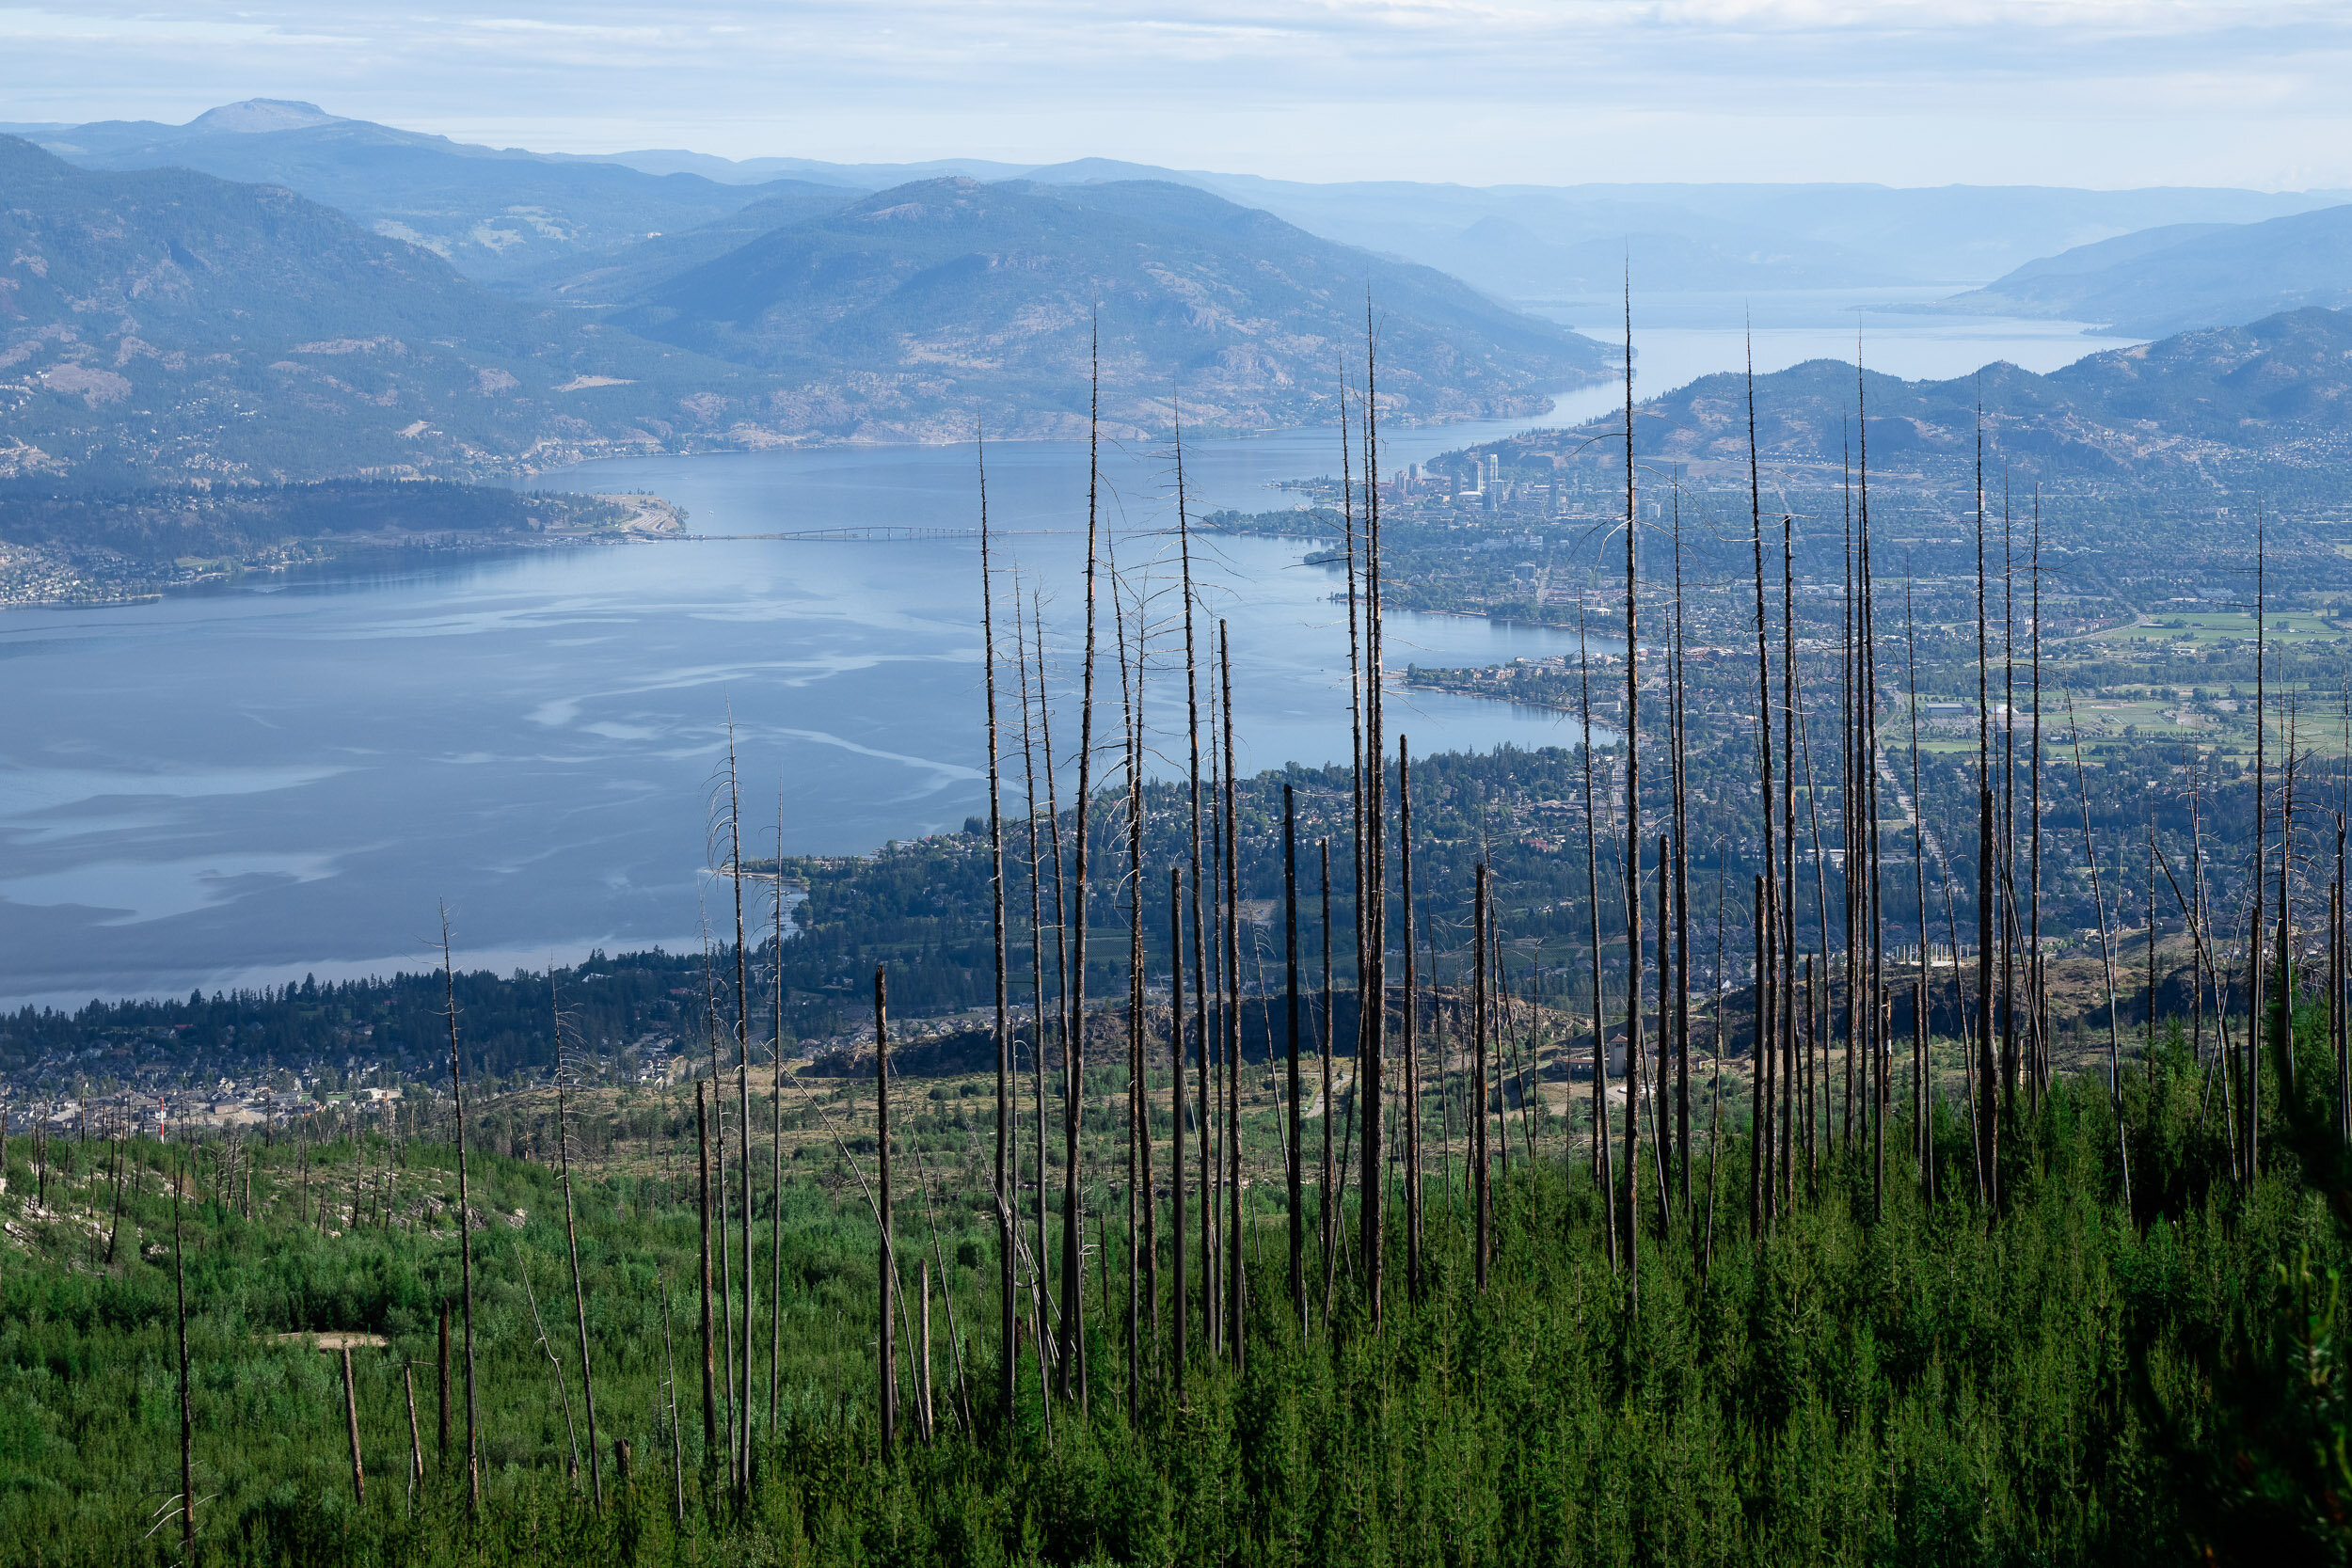  As we came to the top of the pass, we had an amazing view of Kelowna with the 2003 Okanagan Mountain Park Wildfire remains in the foreground. As of 2017, it was the single most damaging and significant wildfire in B.C.'s history, causing $200 millio